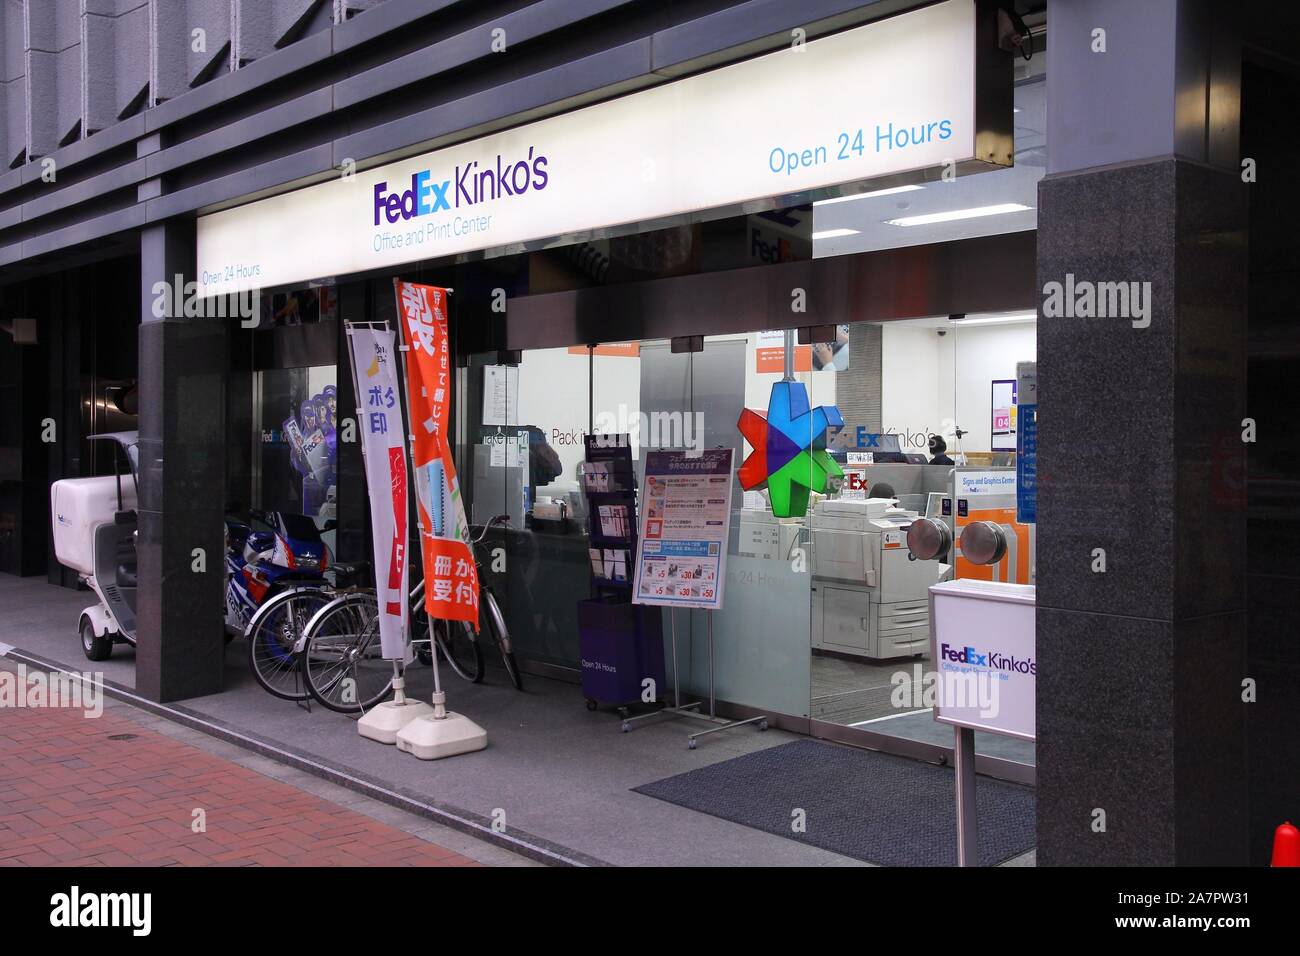 TOKYO, JAPAN - APRIL 13, 2012: Fedex Kinko's office and print center in Tokyo. Fedex Corporation exists since 1971 and employs 300,000 people as of 20 Stock Photo